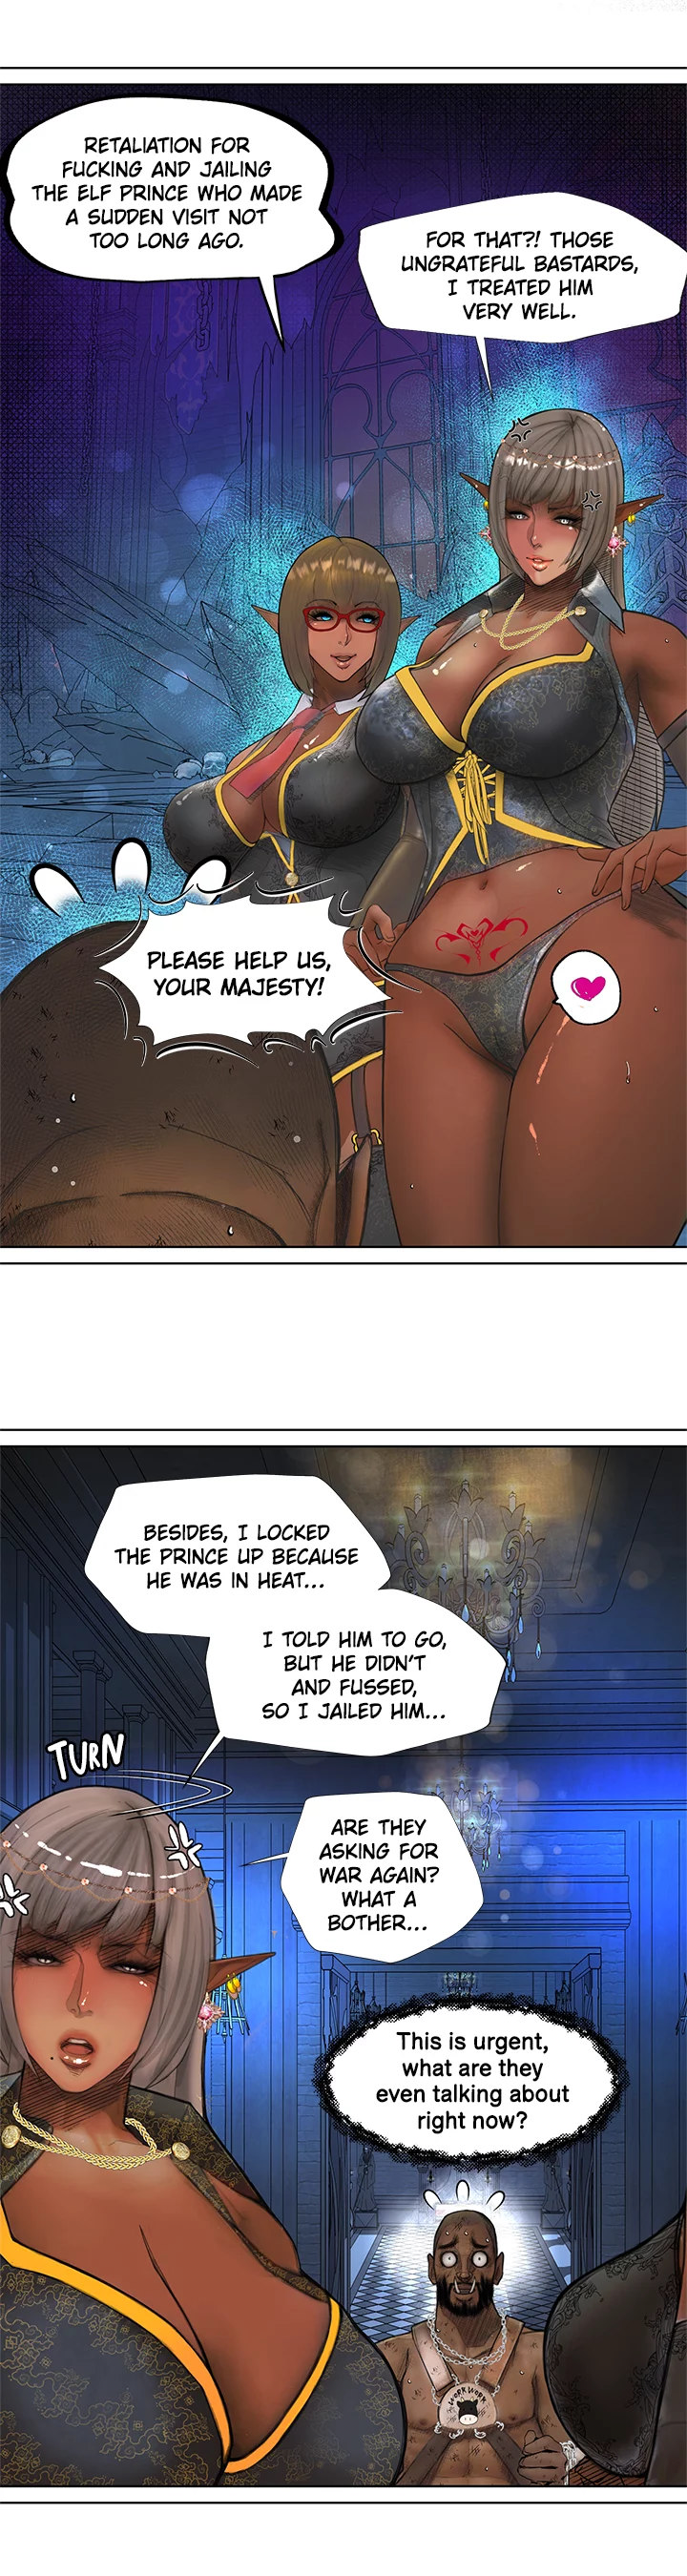 The DARK ELF QUEEN and the SLAVE ORC - Chapter 1 Page 4